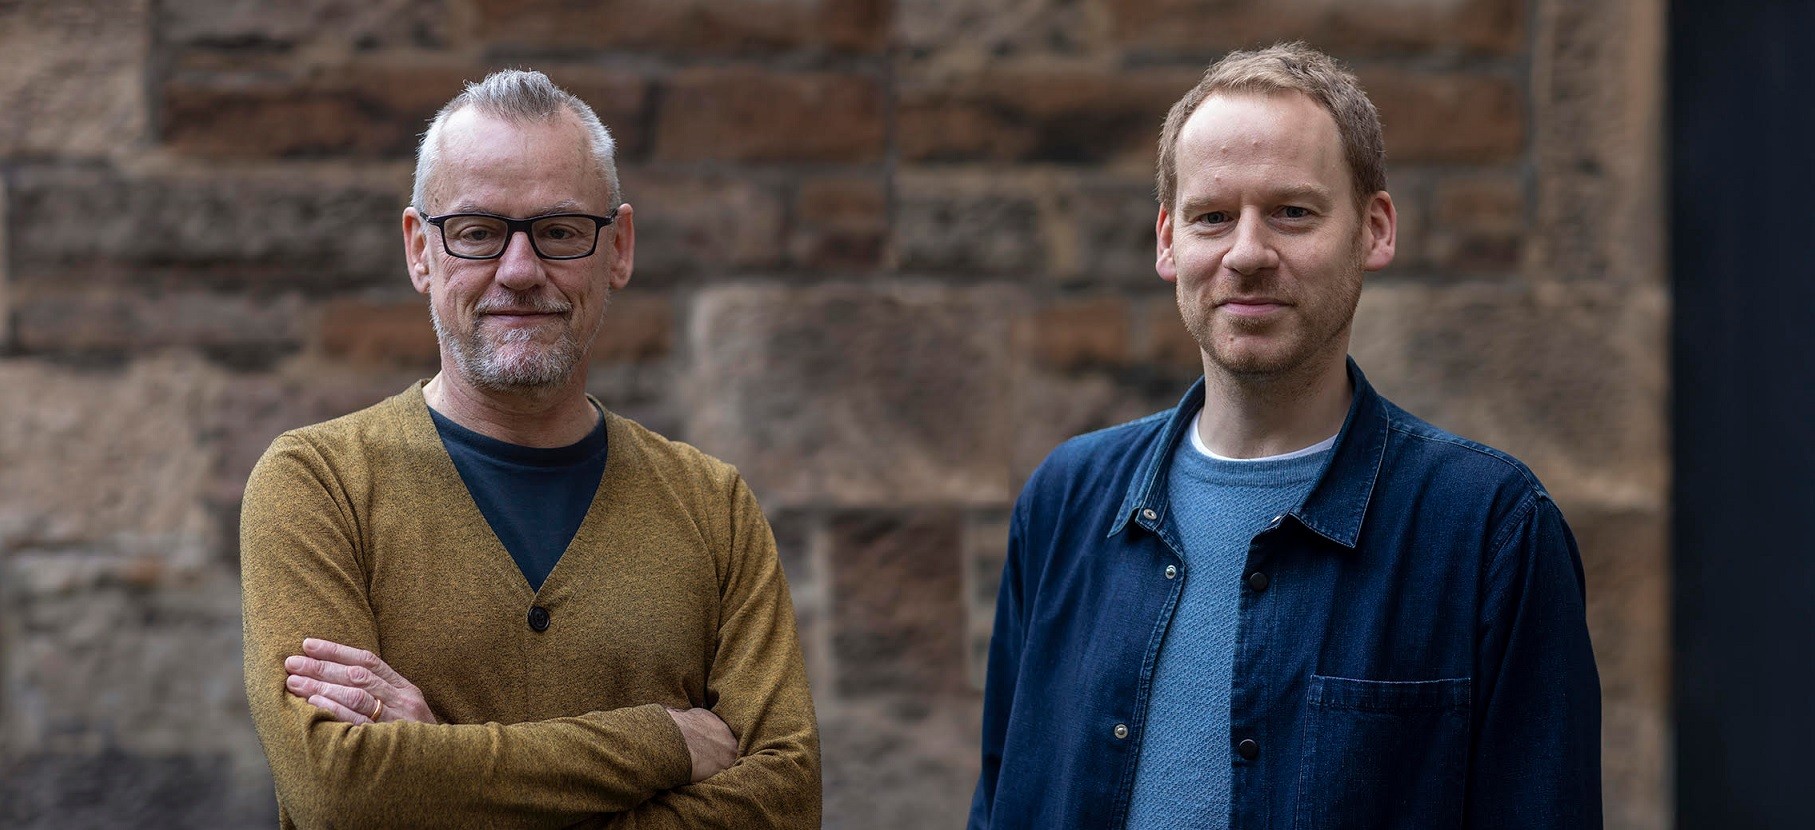 Malcolm Fraser and Robin Livingstone form new practice